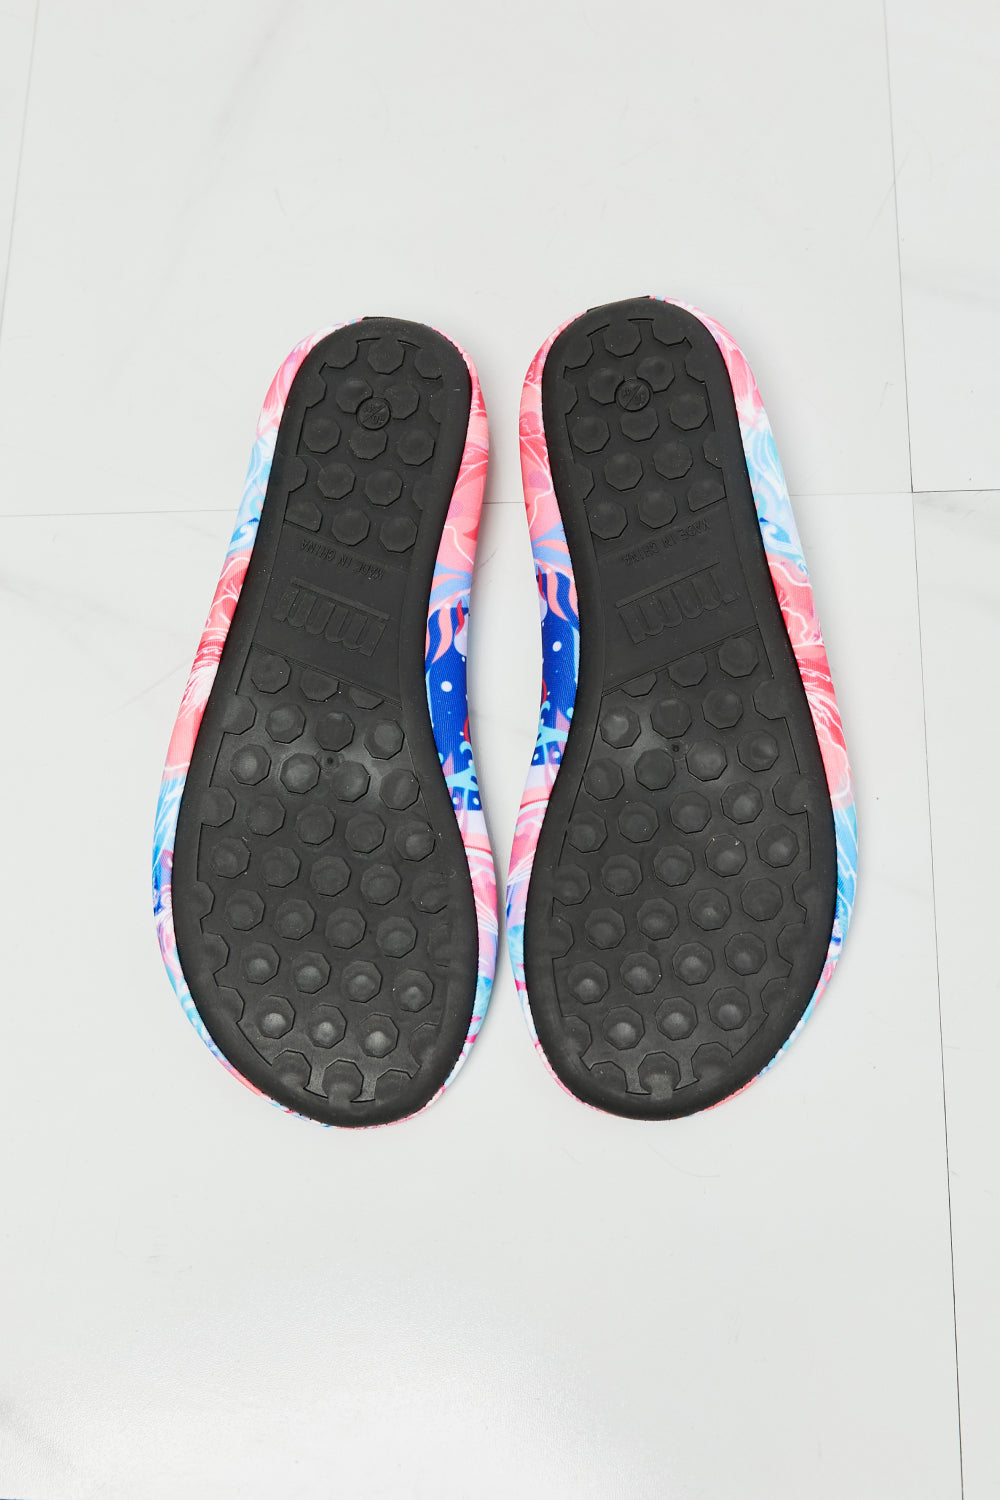 MMshoes On The Shore Water Shoes in Pink and Sky Blue Print on any thing USA/STOD clothes